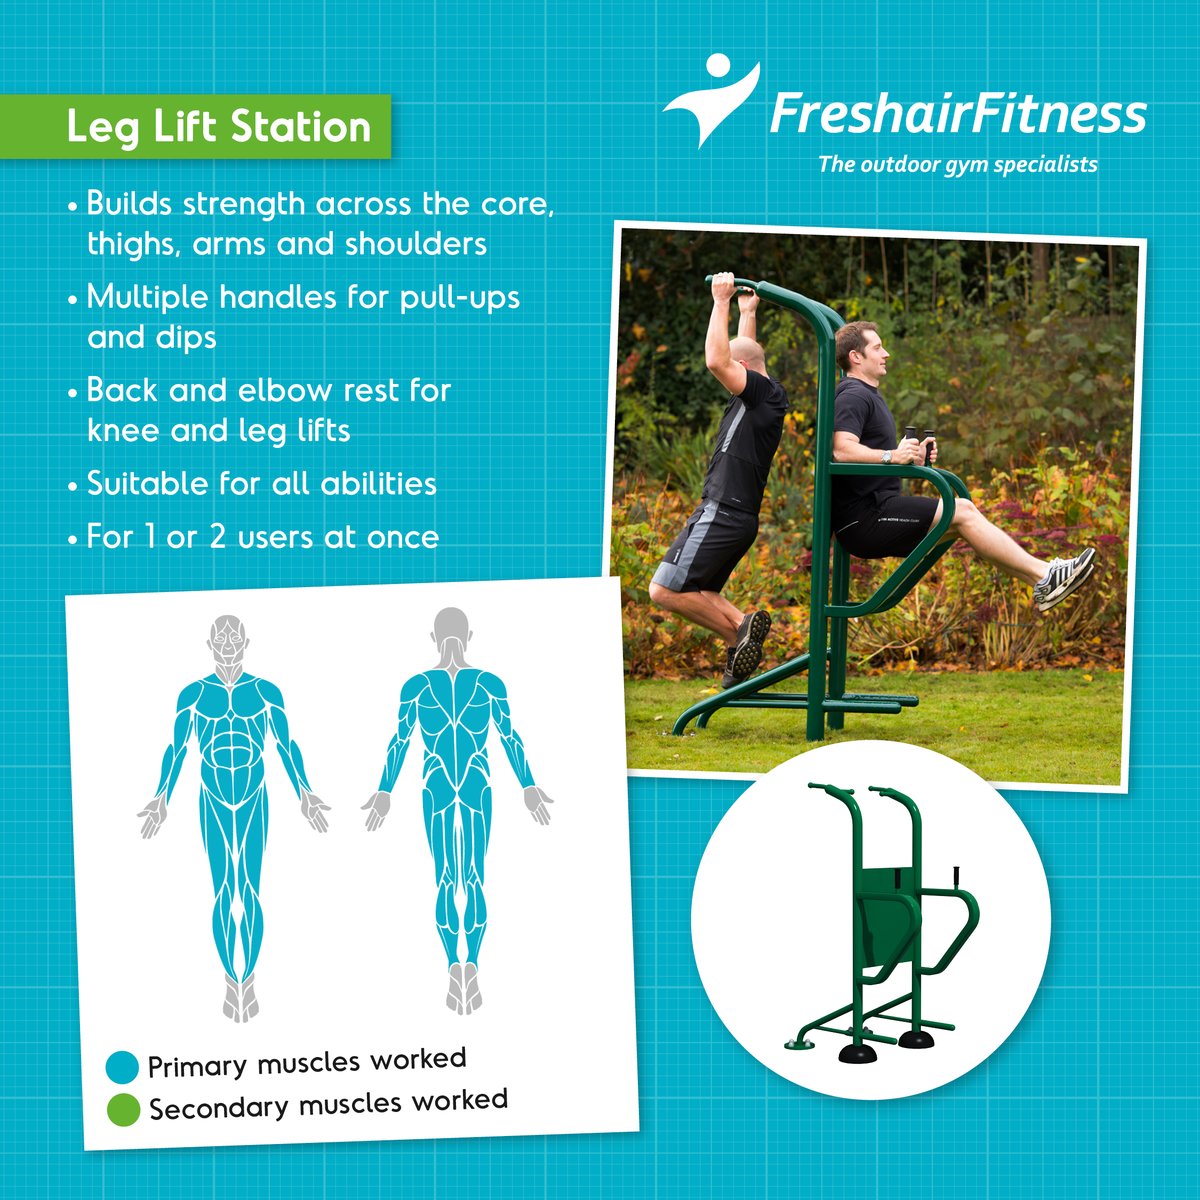 The Leg Lift Station is a fantastic piece of outdoor gym equipment which works the primary muscle groups in the arms, chest, shoulder, back and legs and the secondary muscle groups in the core. The solid frame has extra handles at the back for neutral or lateral grip pull-ups.